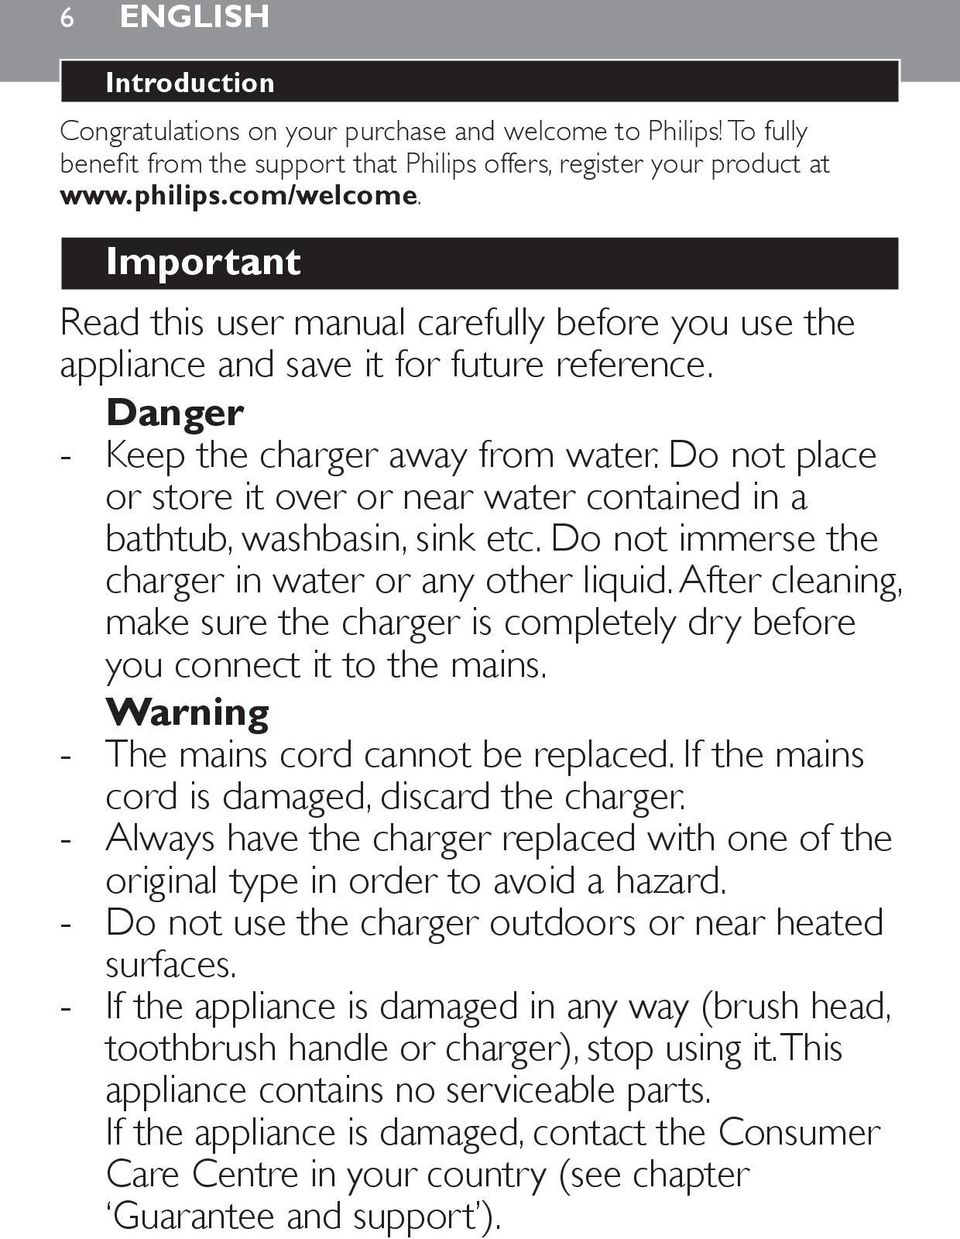 Do not place or store it over or near water contained in a bathtub, washbasin, sink etc. Do not immerse the charger in water or any other liquid.